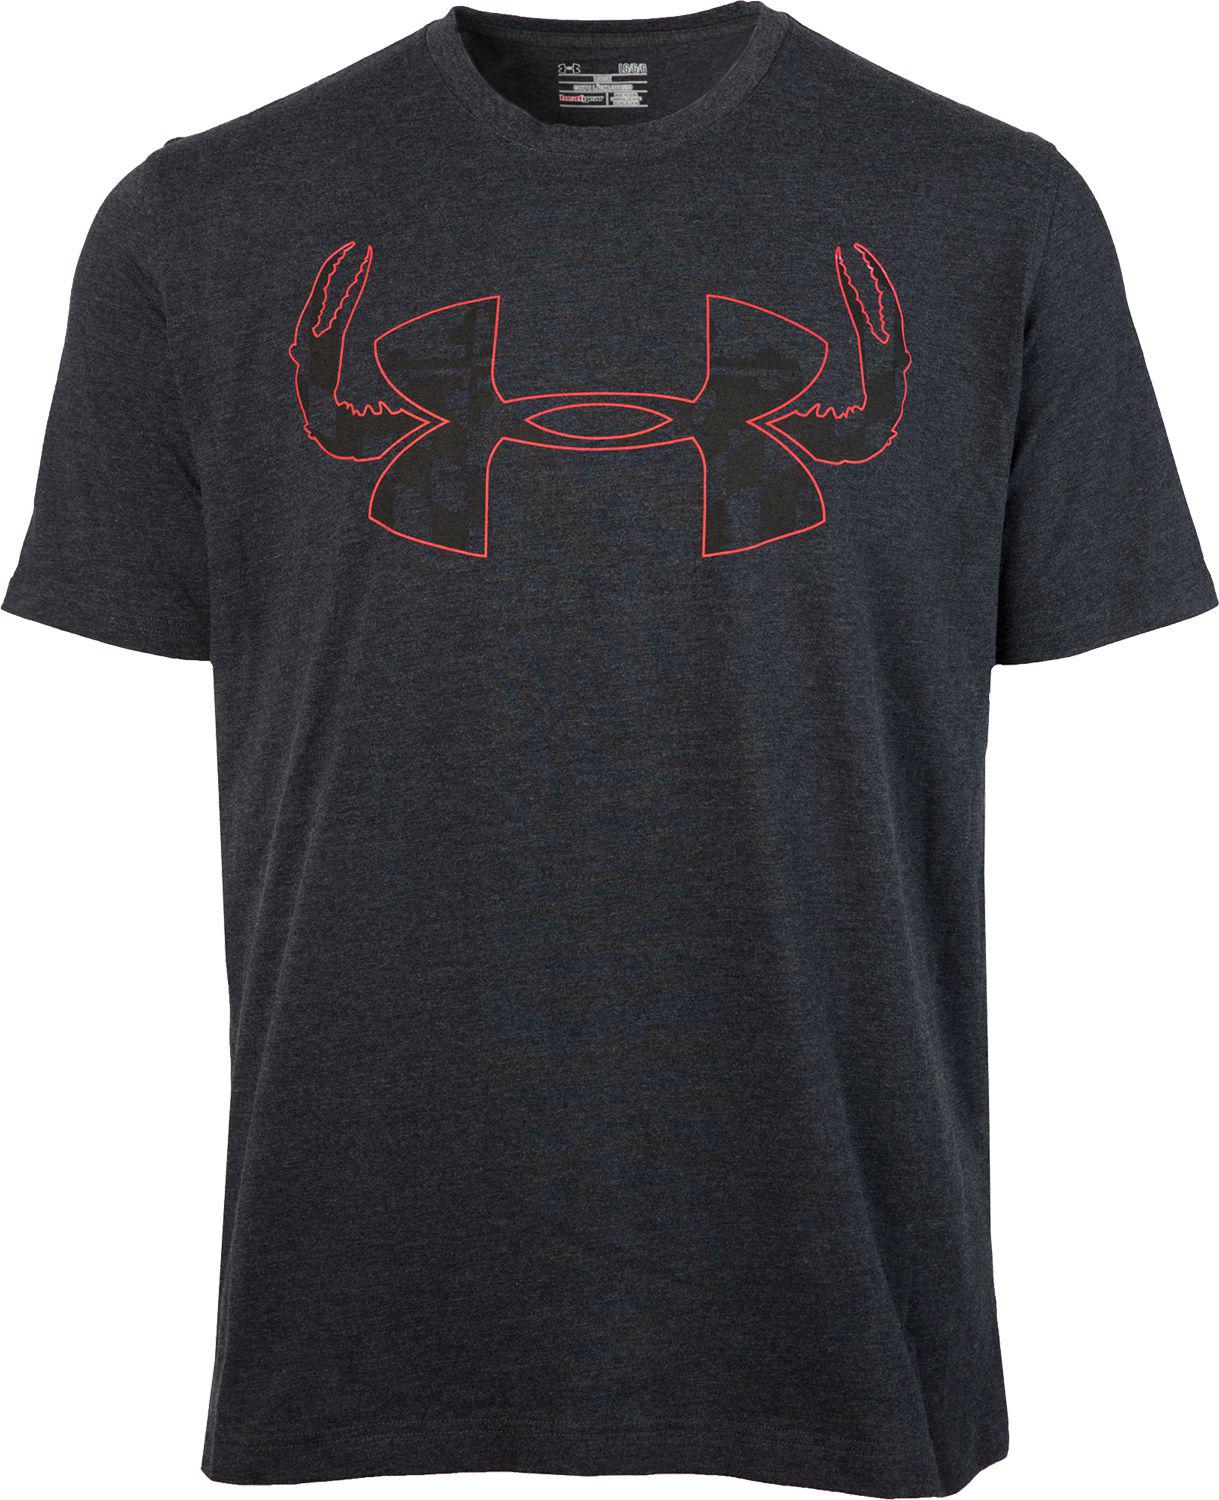 under armour crab shirt off 60% - www 